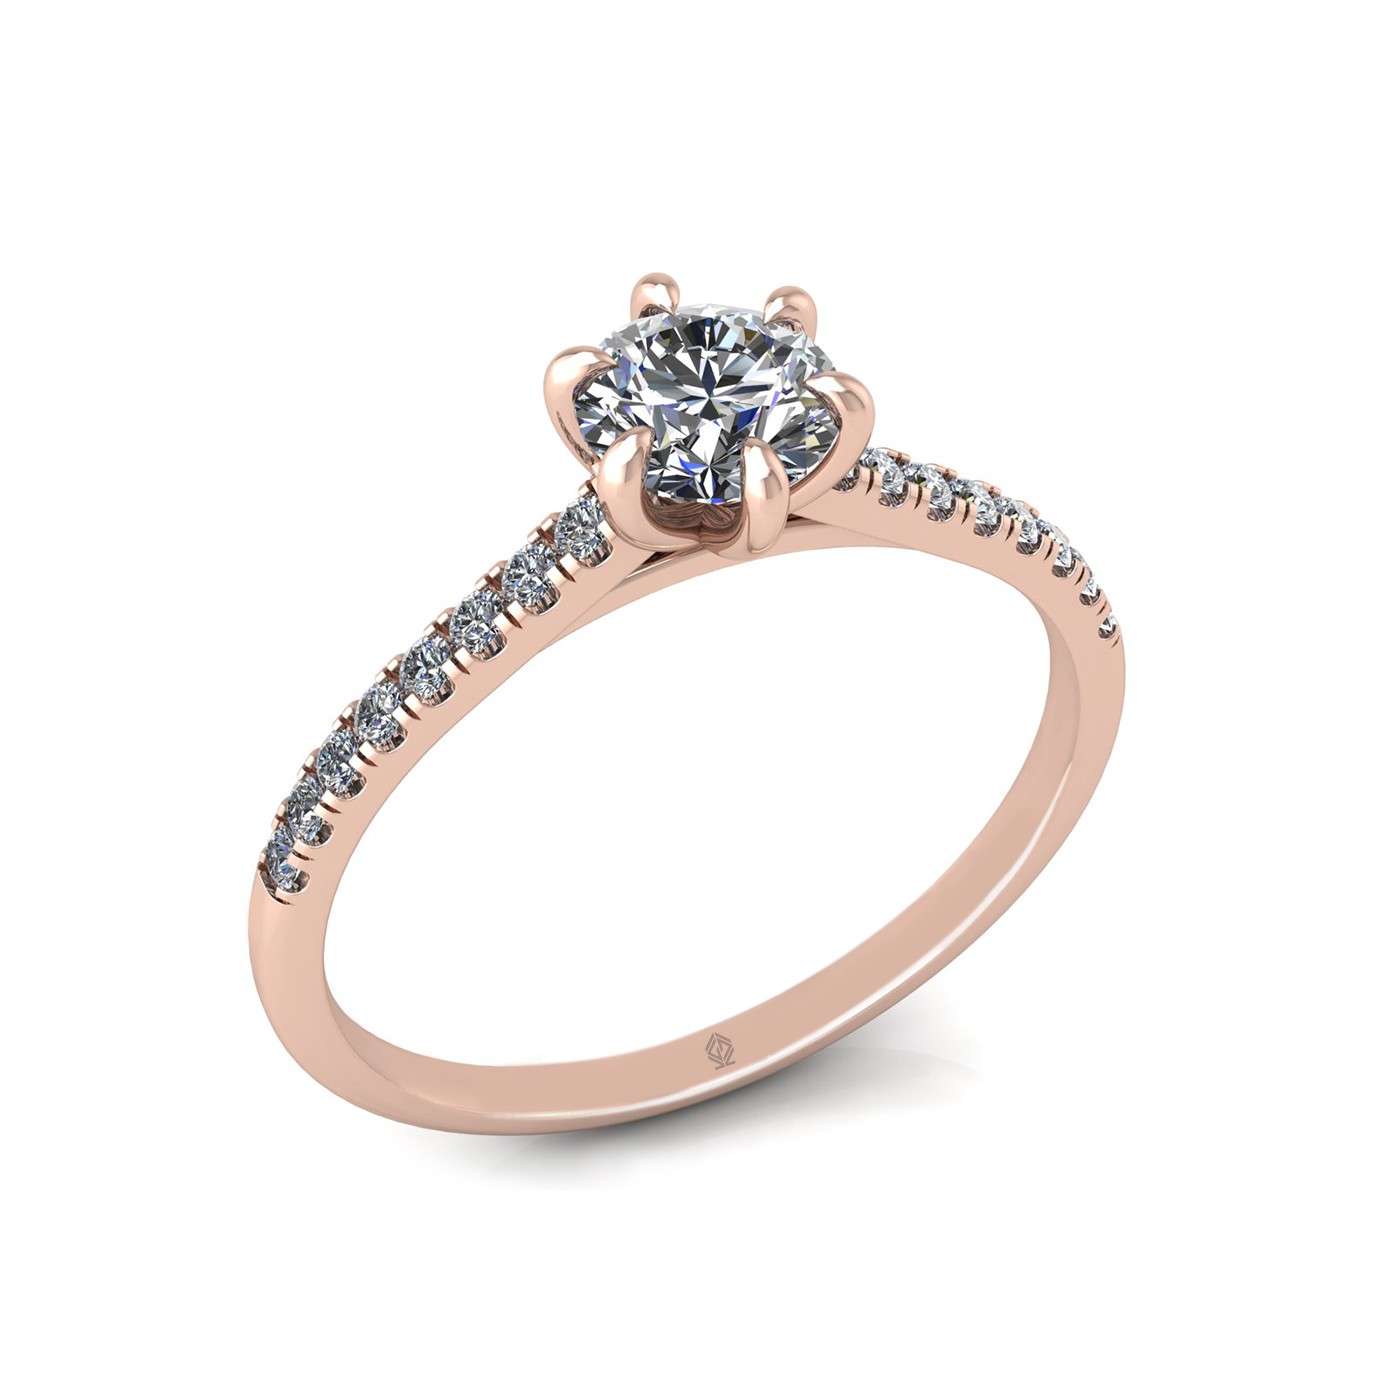 18k rose gold 0,50 ct 6 prongs round cut diamond engagement ring with whisper thin pavÉ set band